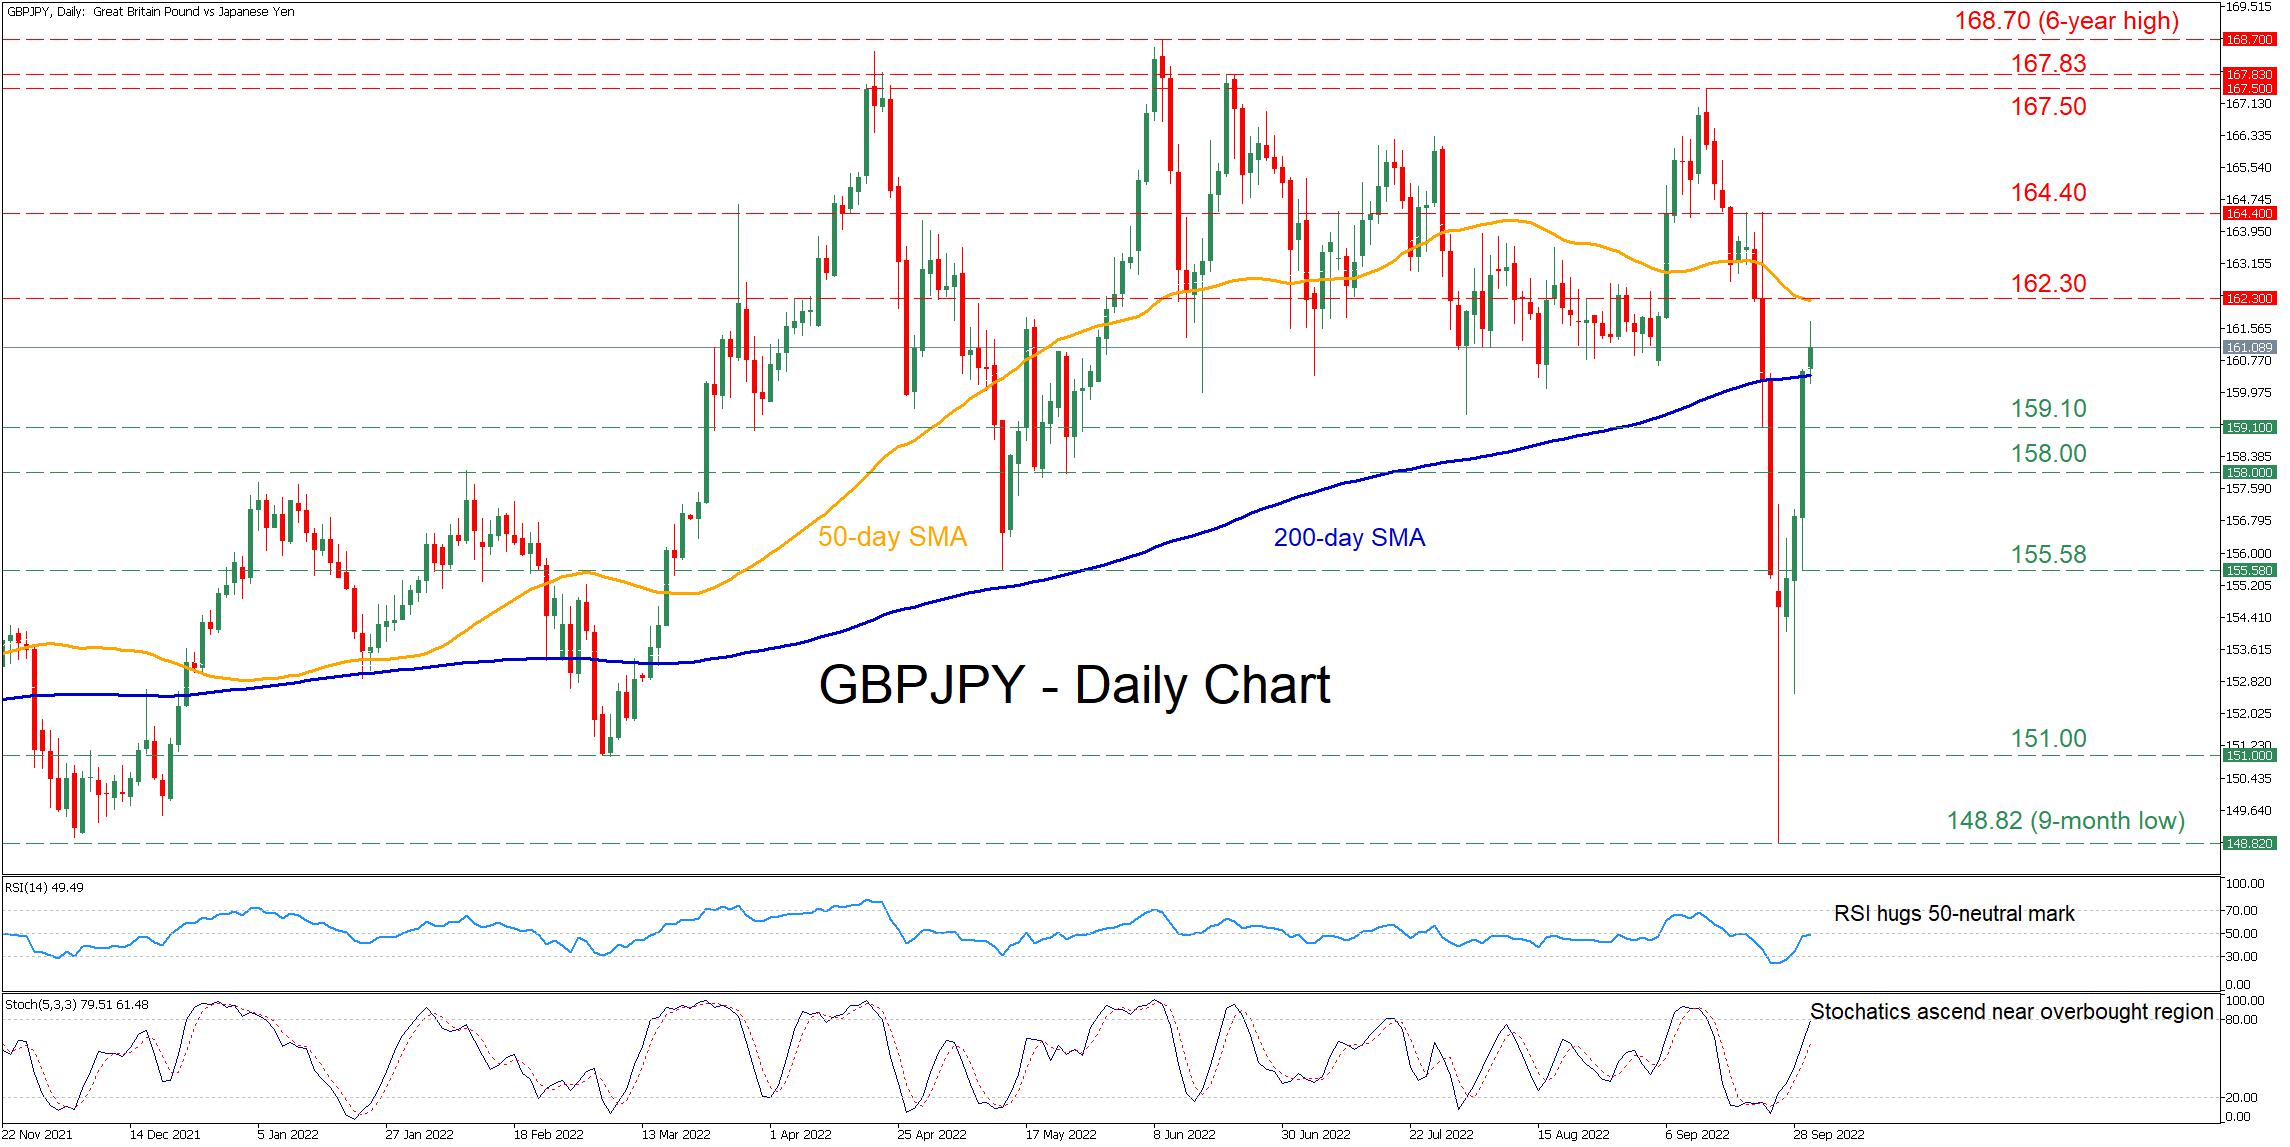 GBP/JPY rebounds swiftly from its sharp drop [Video]